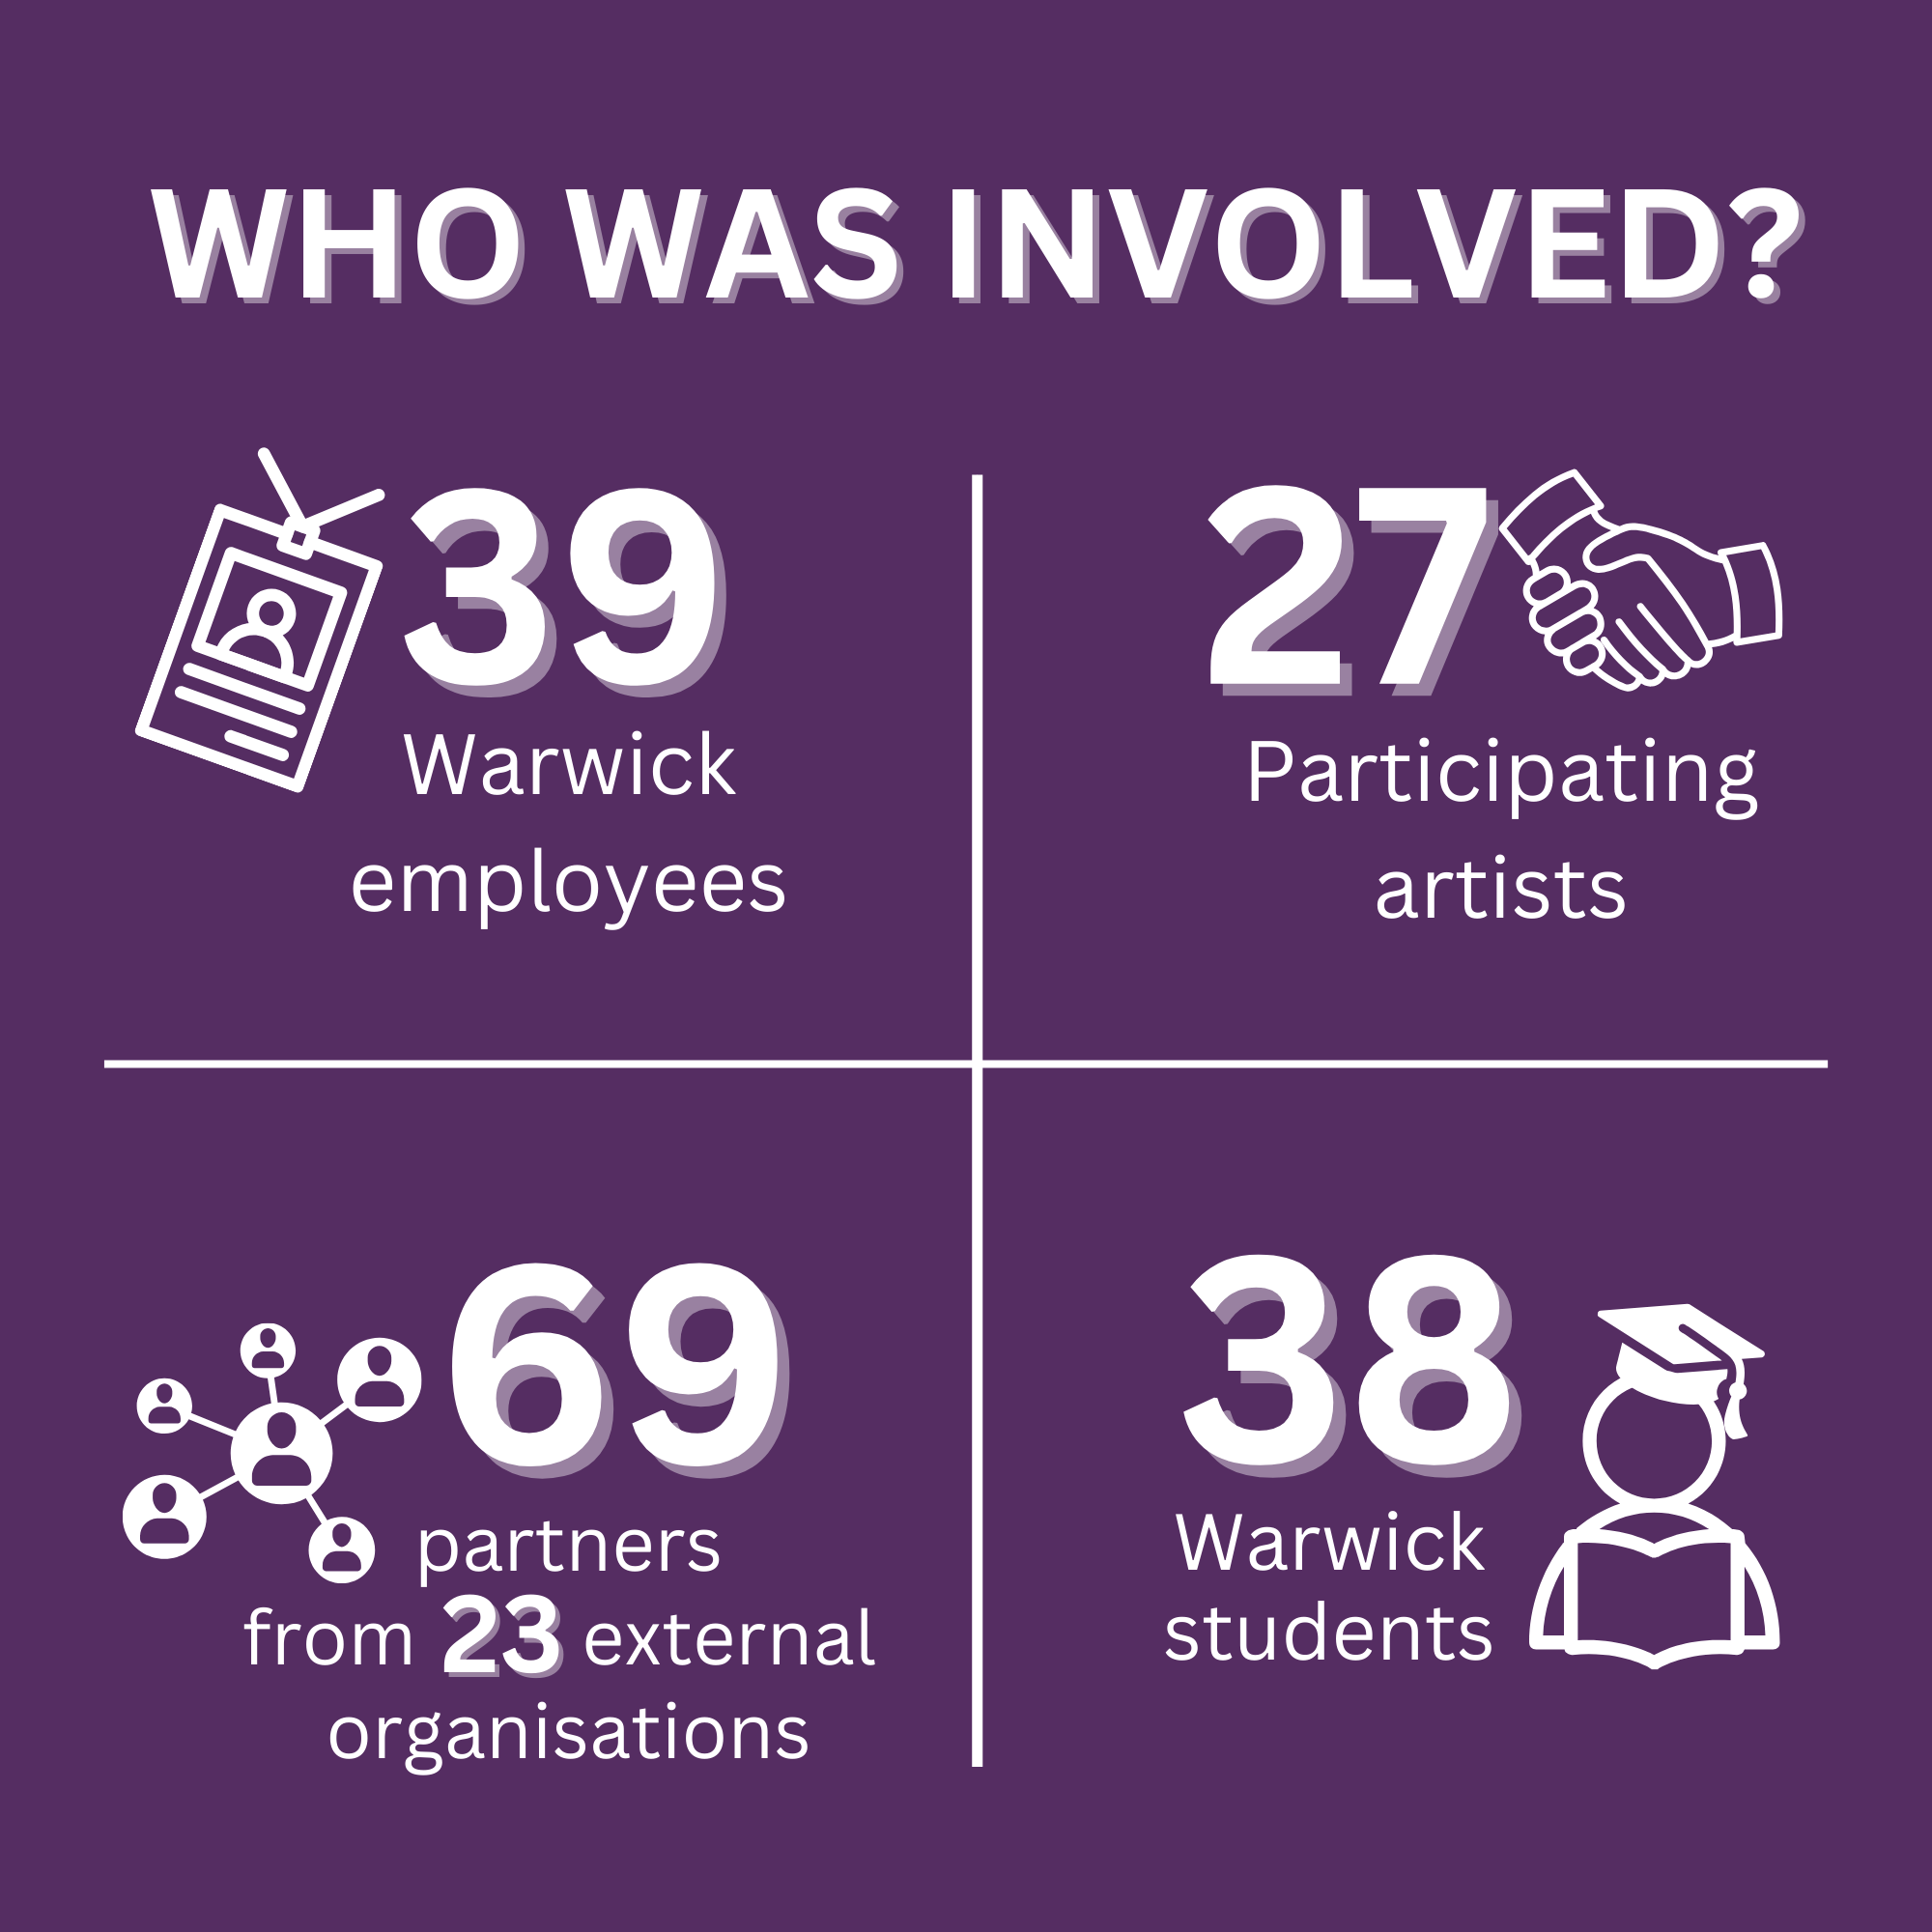 who was involved? 39 Warwick employees, 27 artist, 69 partners from 23 organisations, 38 students